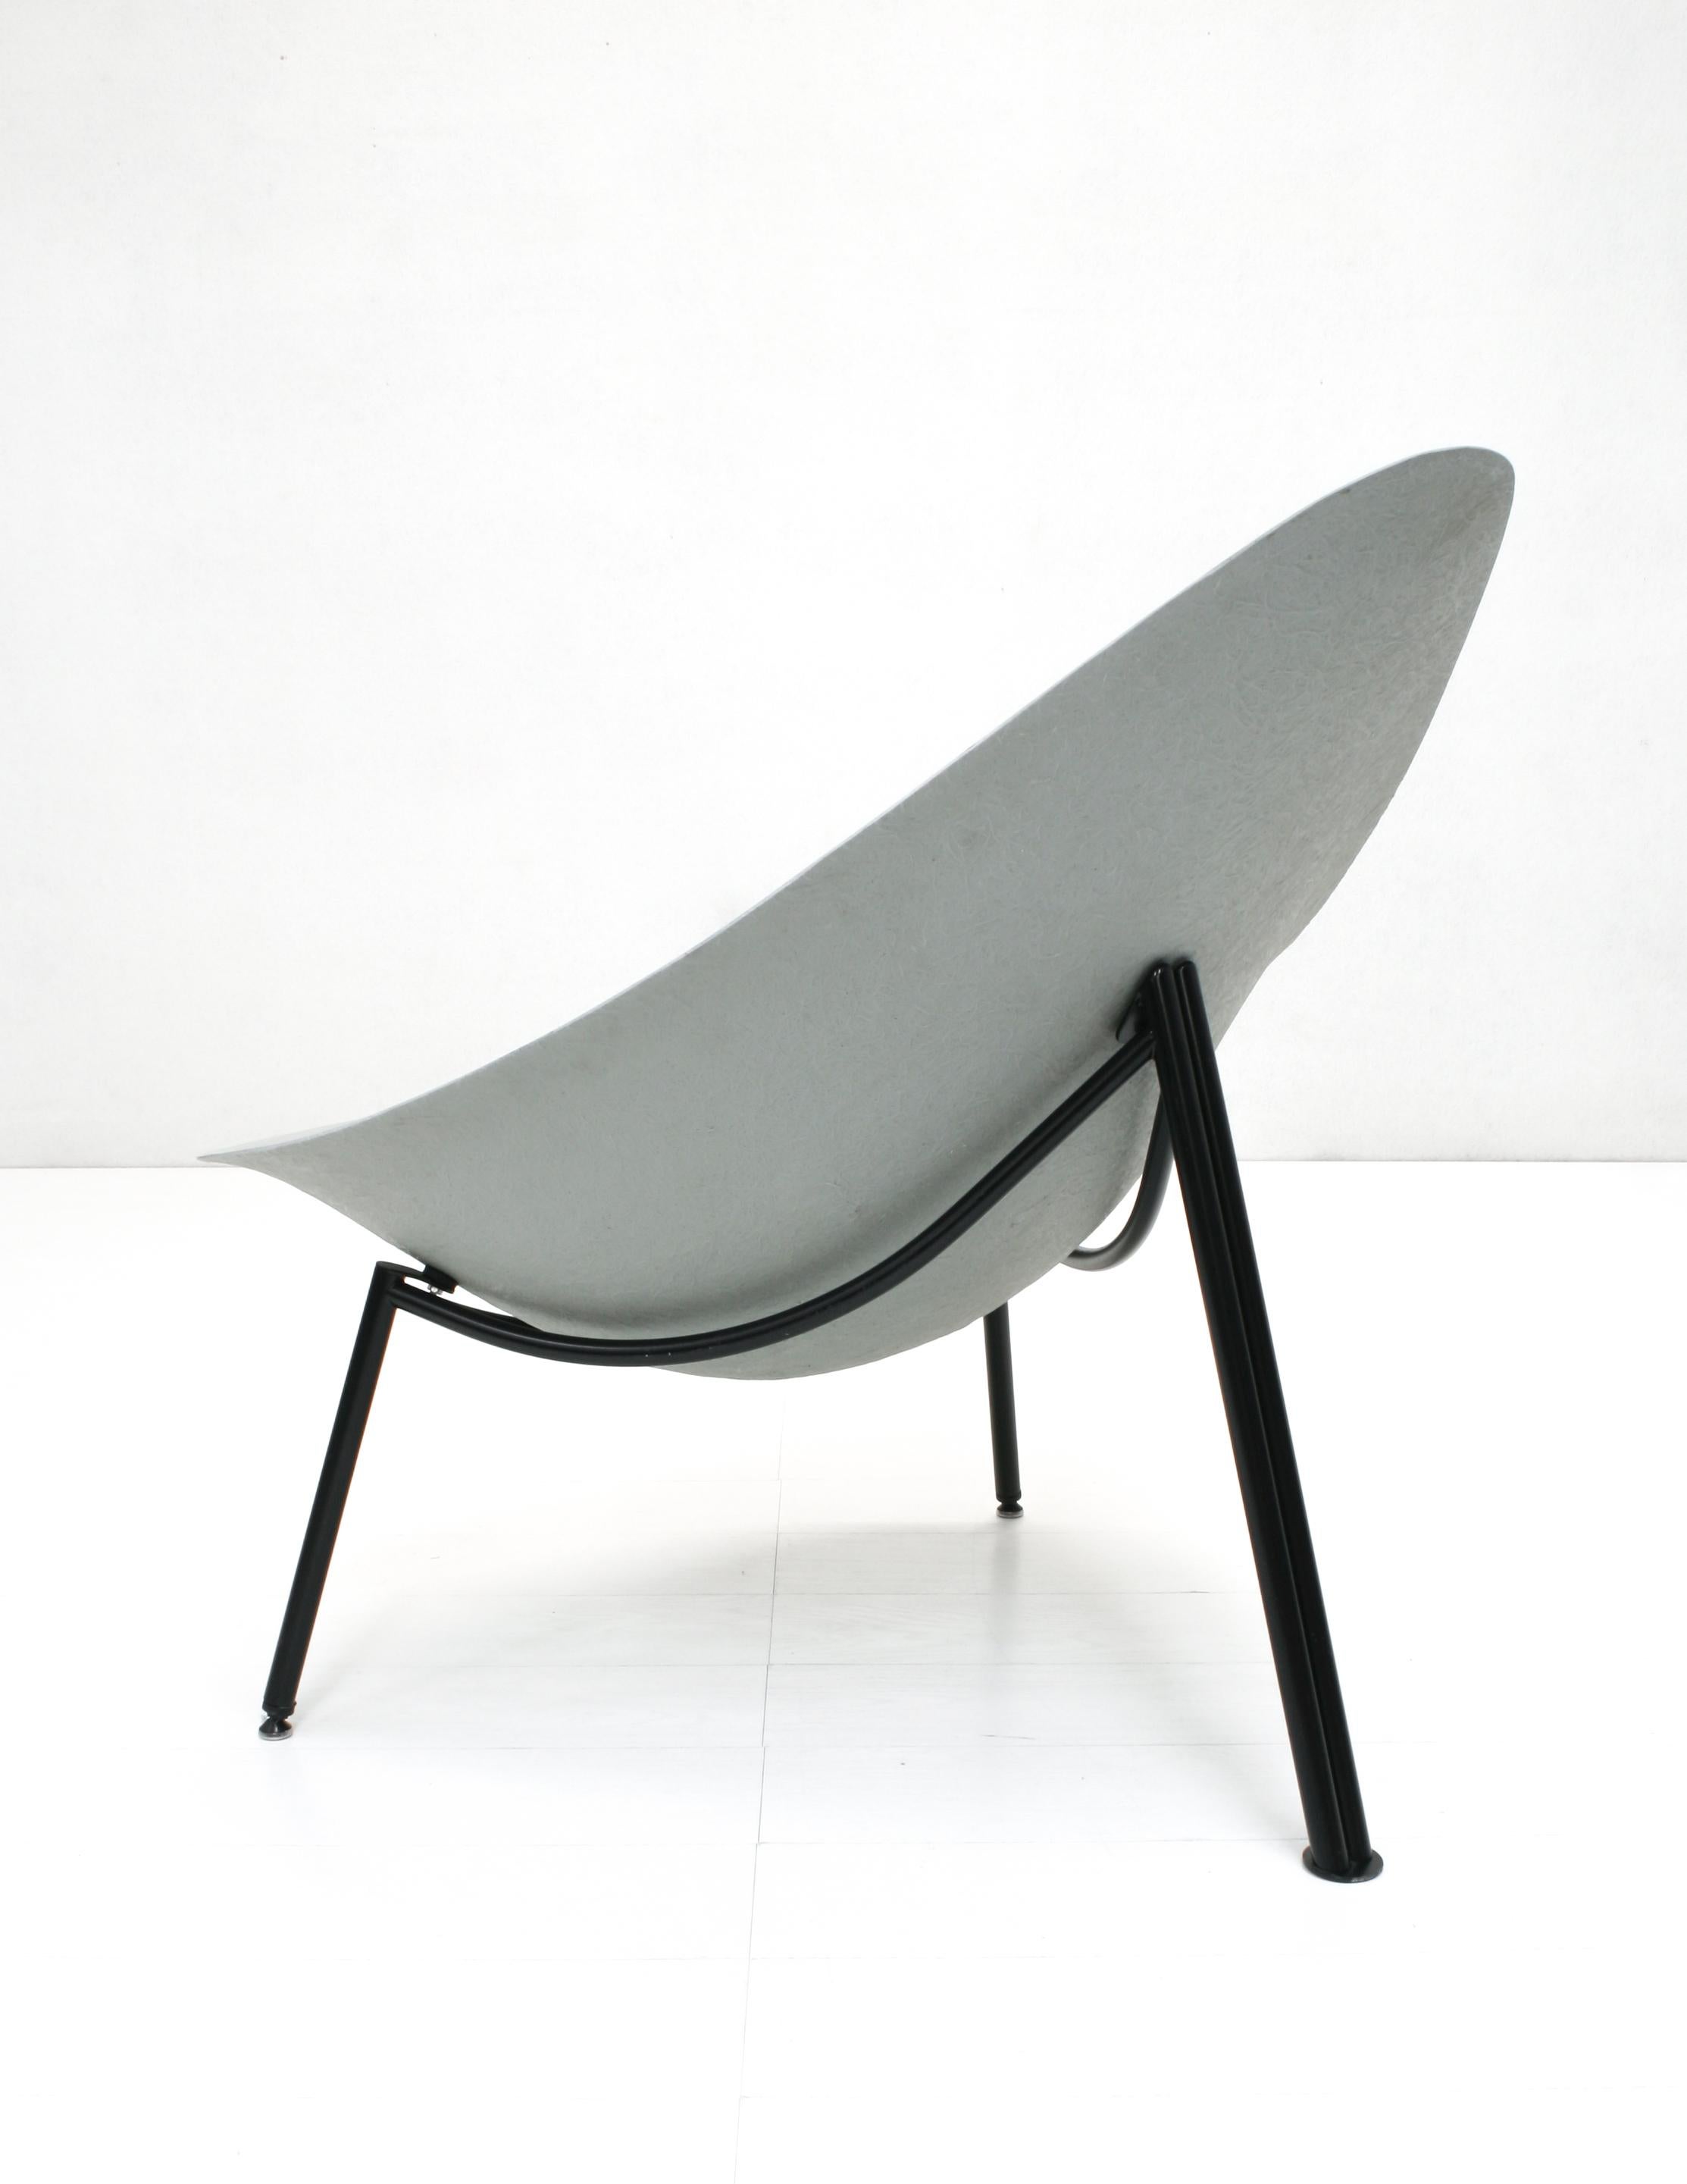 The Mérat fiberglass lounge chair, originally designed in 1956 comes in a grey shell on a black steel tube tripod frame.

This version is more recent but shows a clearly visible strong fibre structure and does have the vintage French mondernist